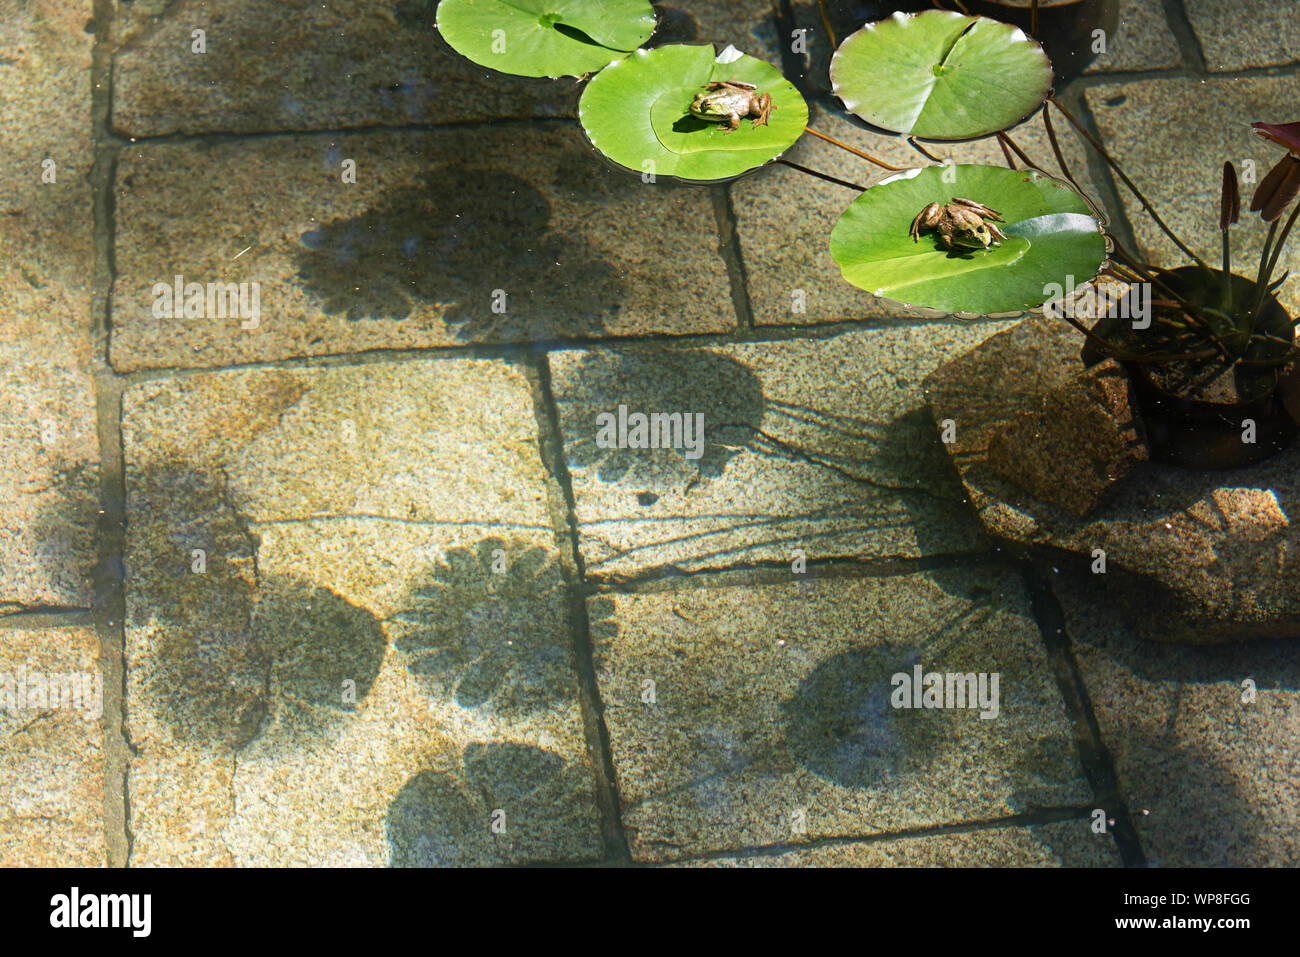 Two Green Frogs (Lithobates clamitans melanota) sit on lily pads in a pool, casting shadows on the pool floor, Seal Harbor, Maine. Stock Photo